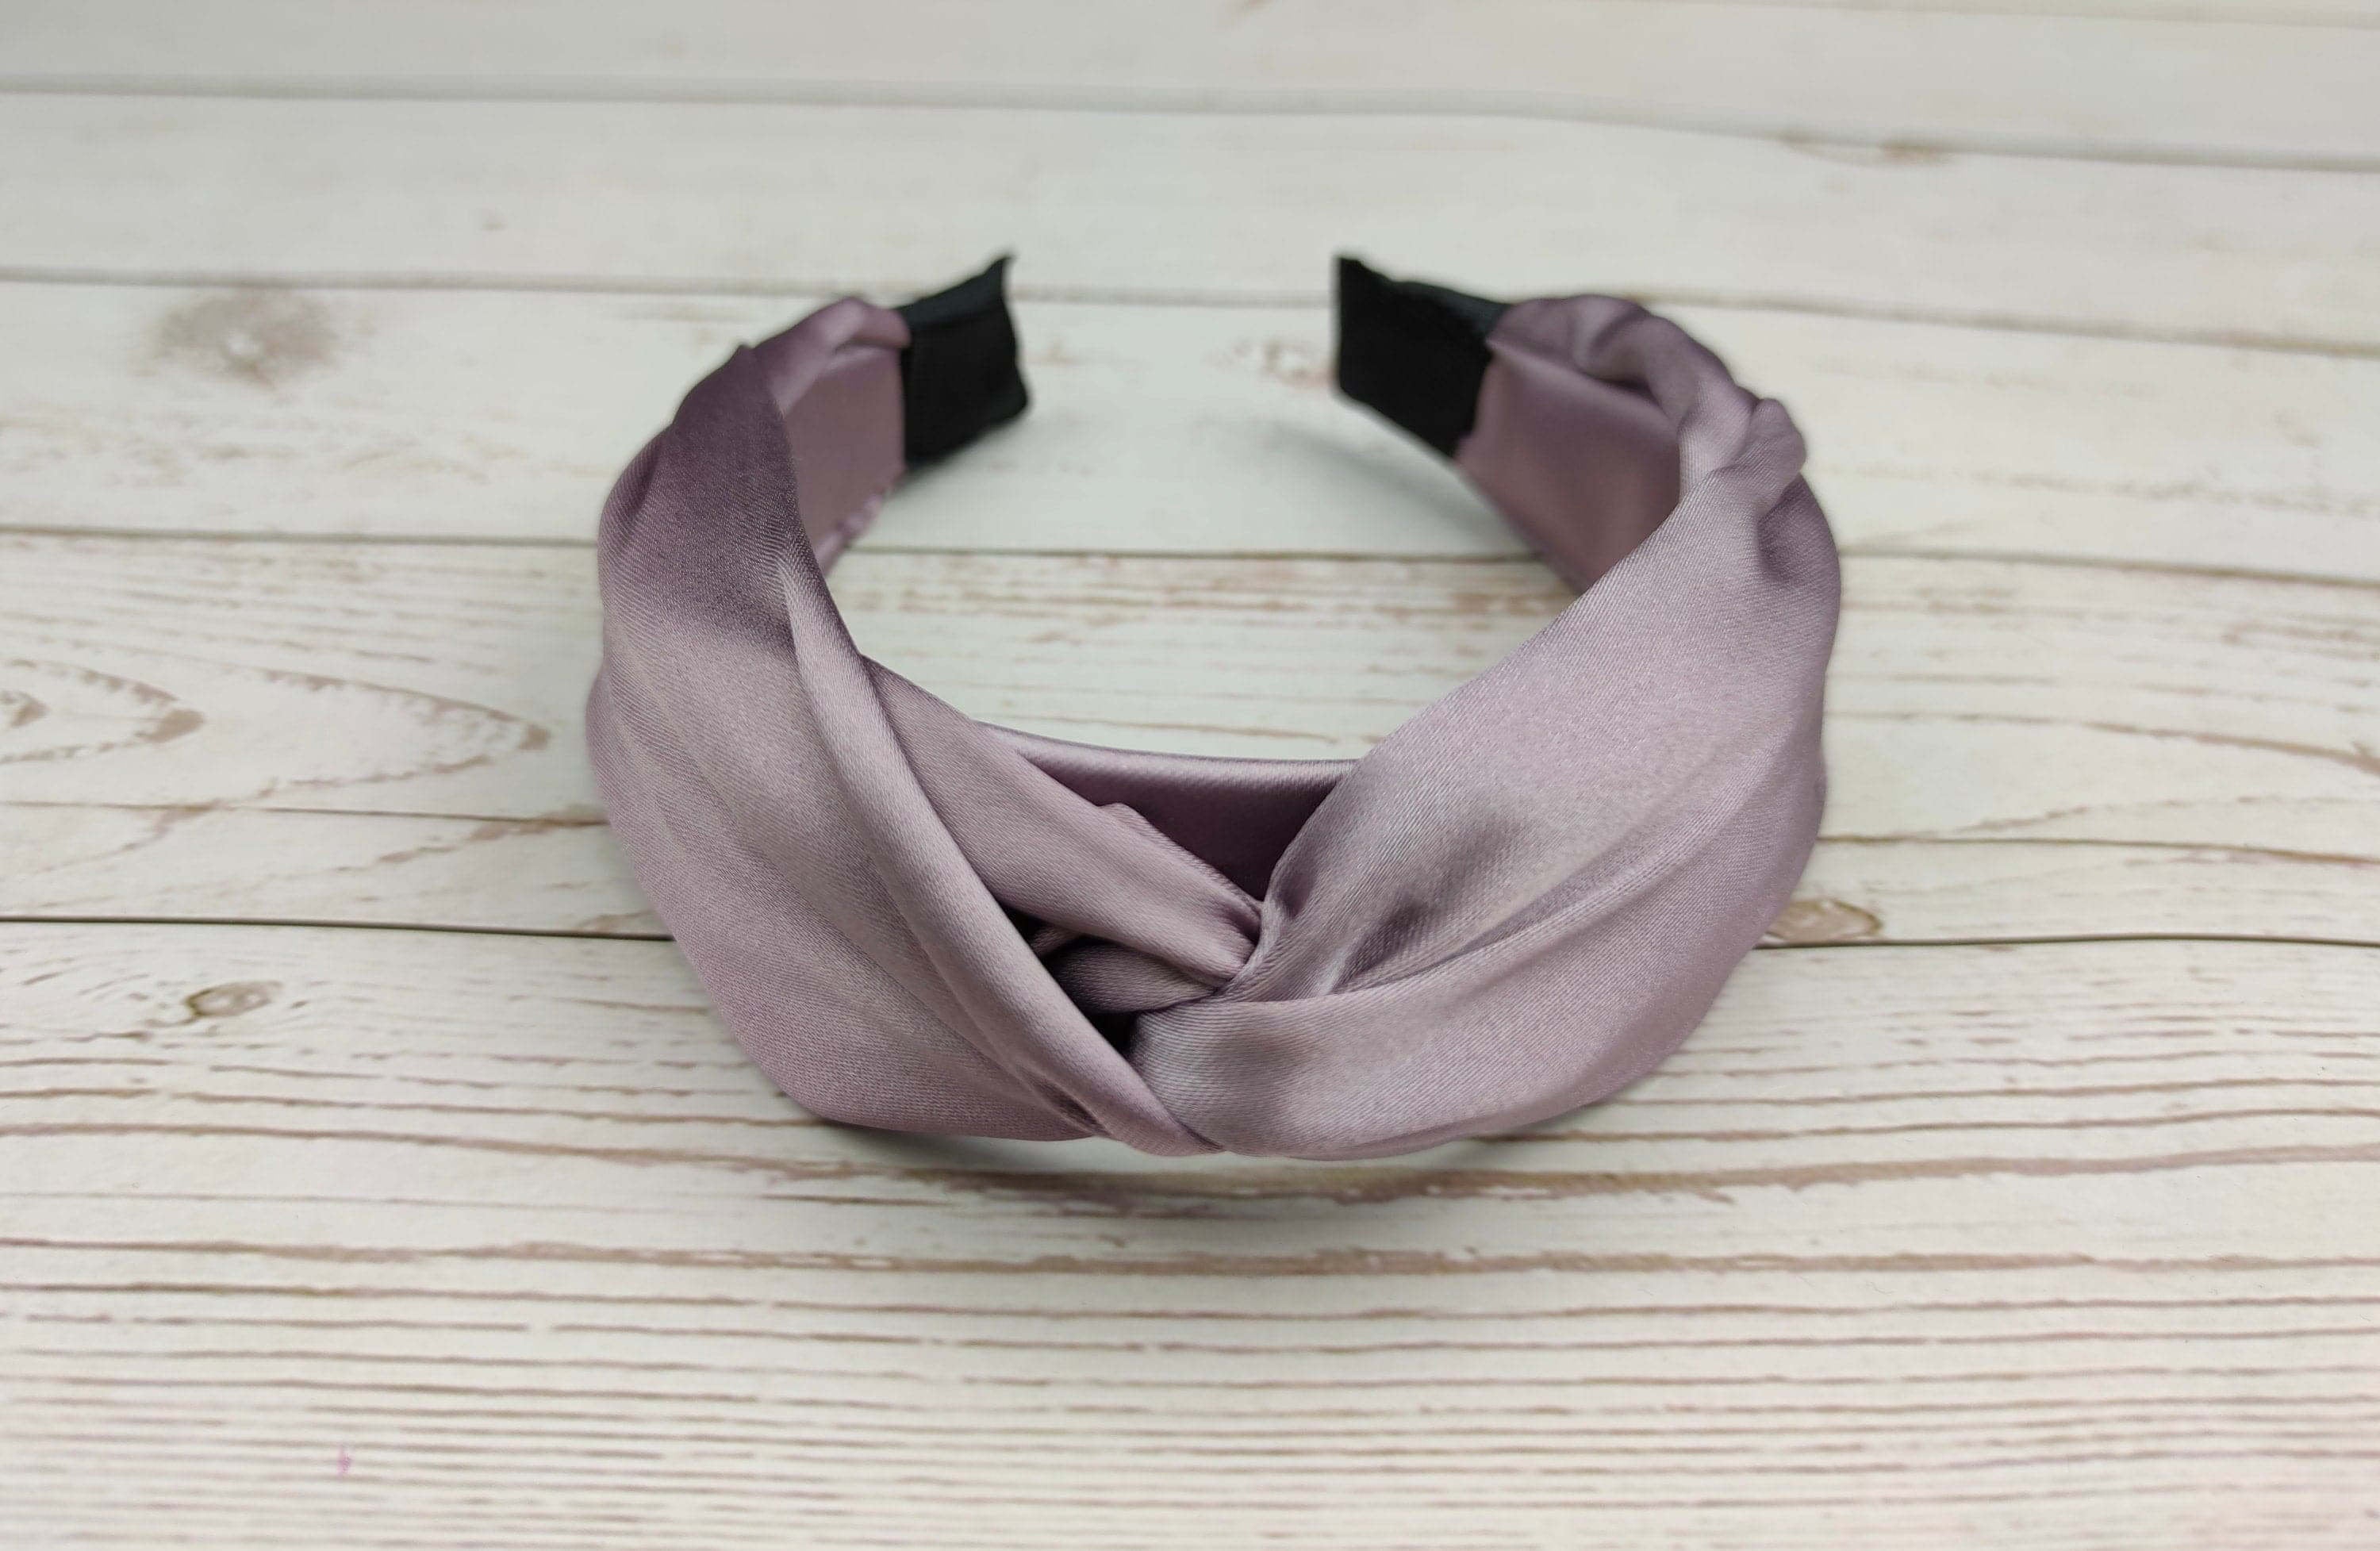 Elegant Lilac Satin Headband: This knotted headband is perfect for adding a touch of sophistication to any outfit.